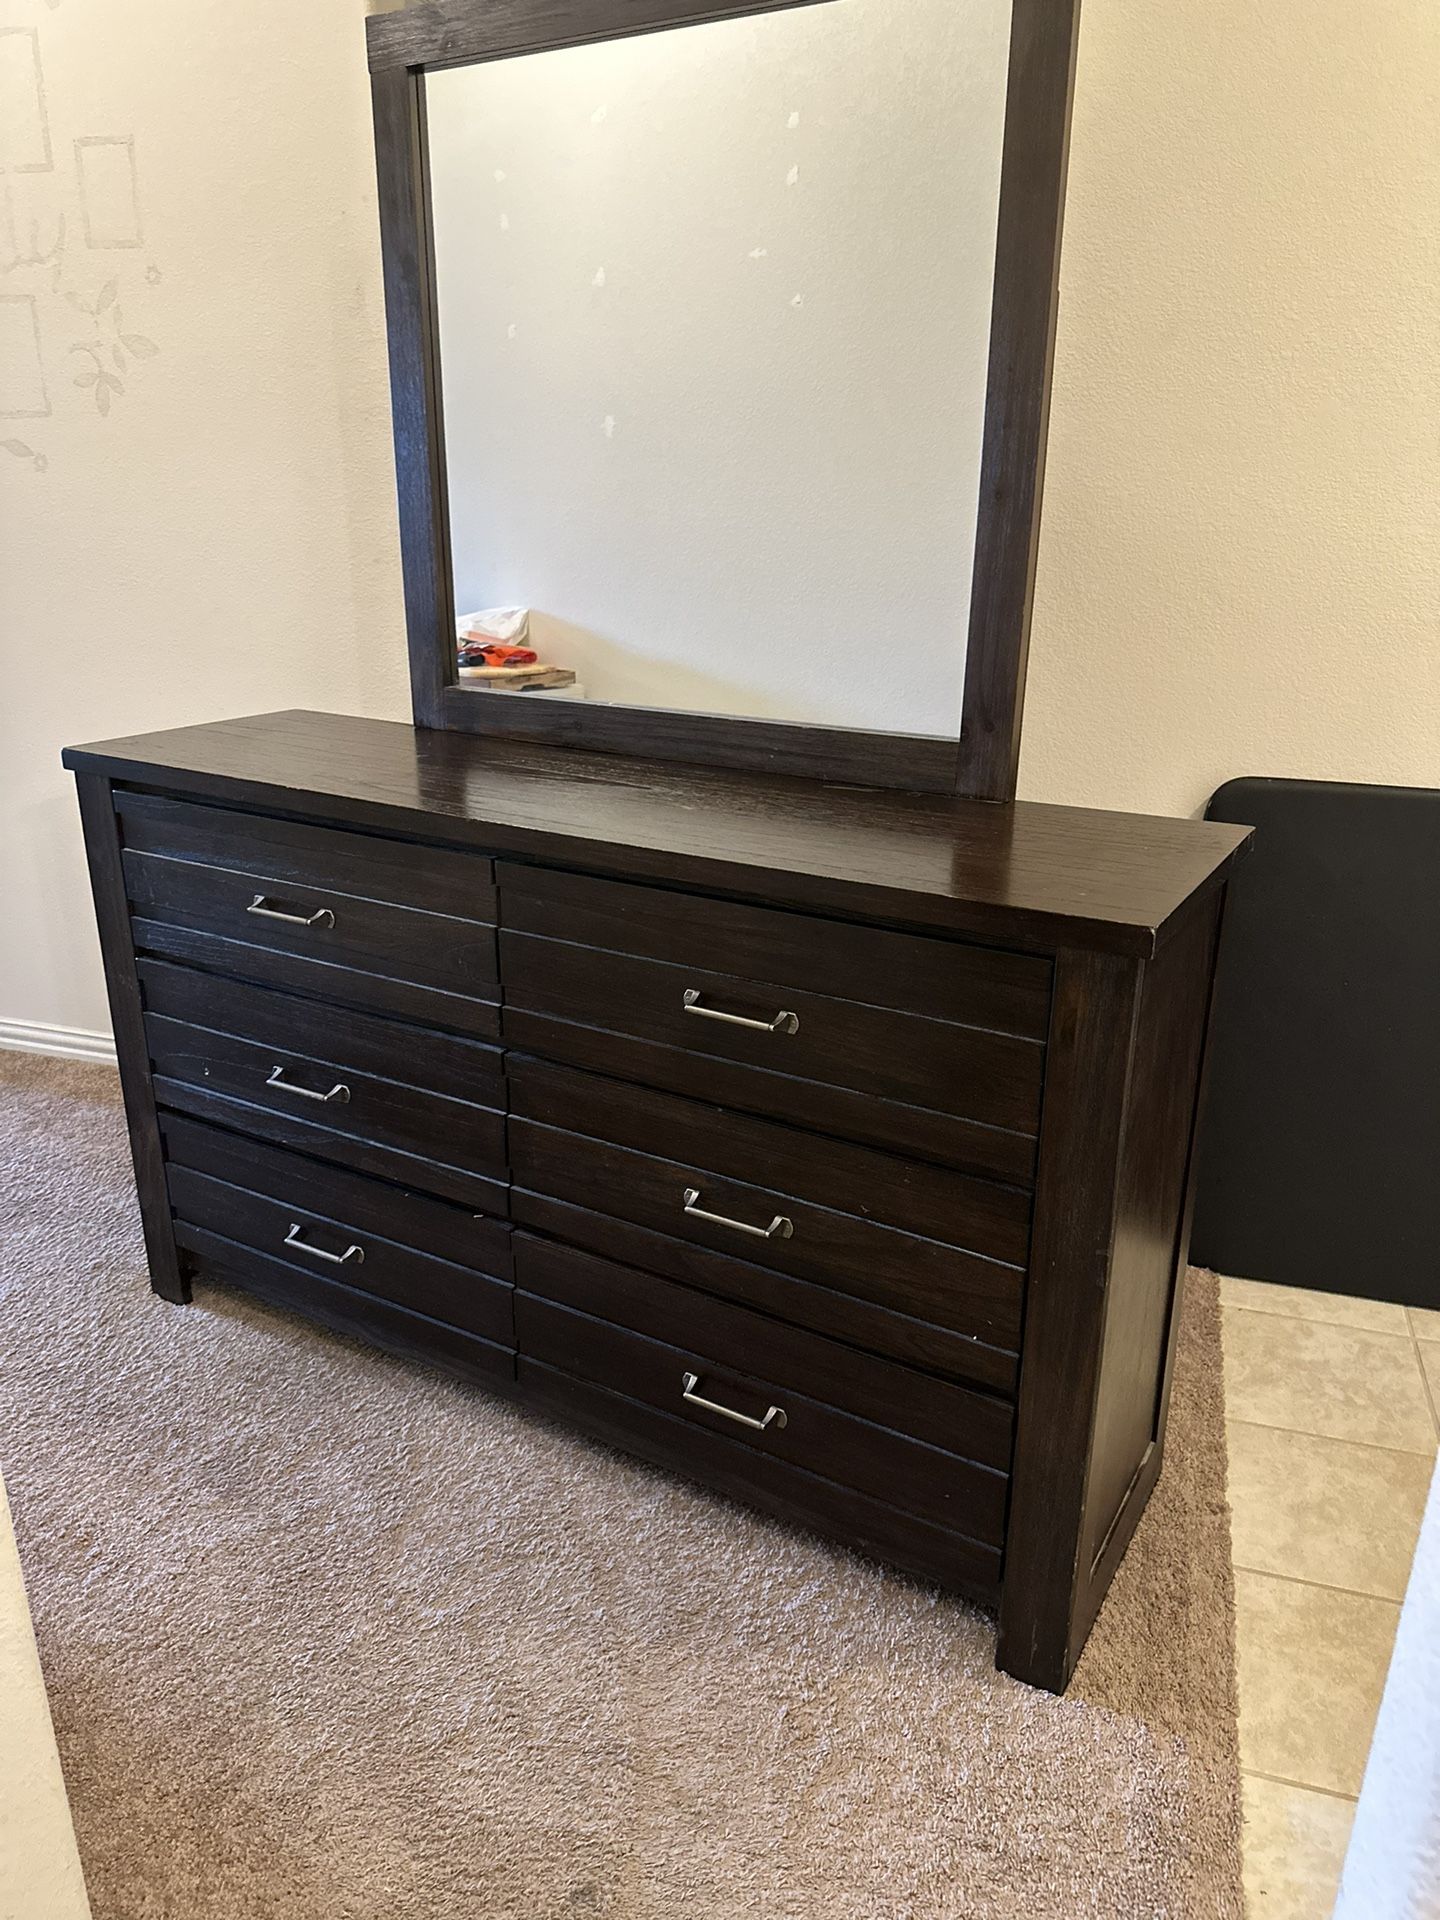 Dresser With Mirror And Night Stand 2 Extra Drawers For Storage Under 